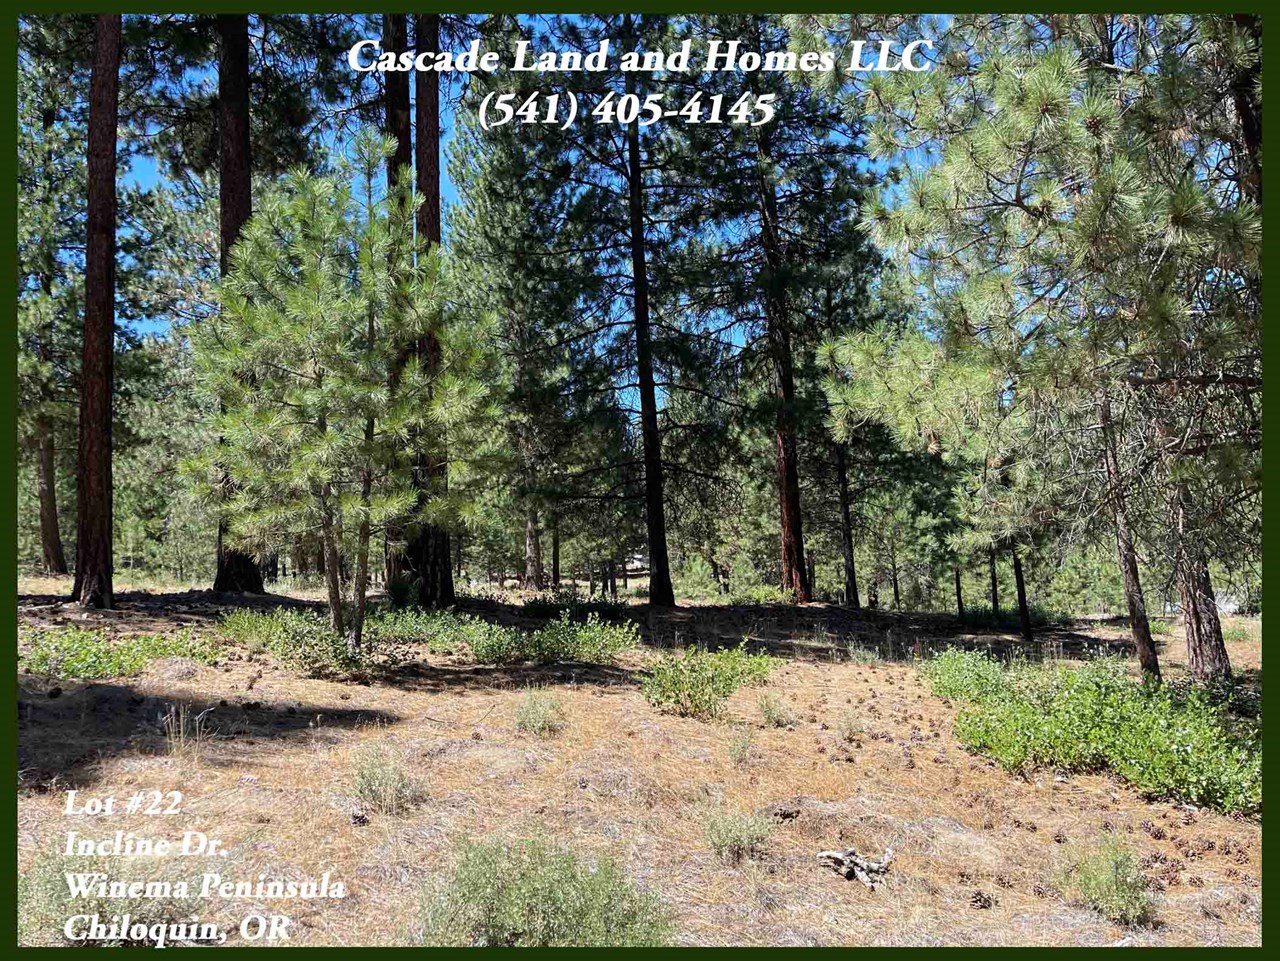 this is an area of custom homes and mostly long term residents, but it would also make a great place for a vacation home. the property is centrally located for outdoor recreation, no matter what season it is!